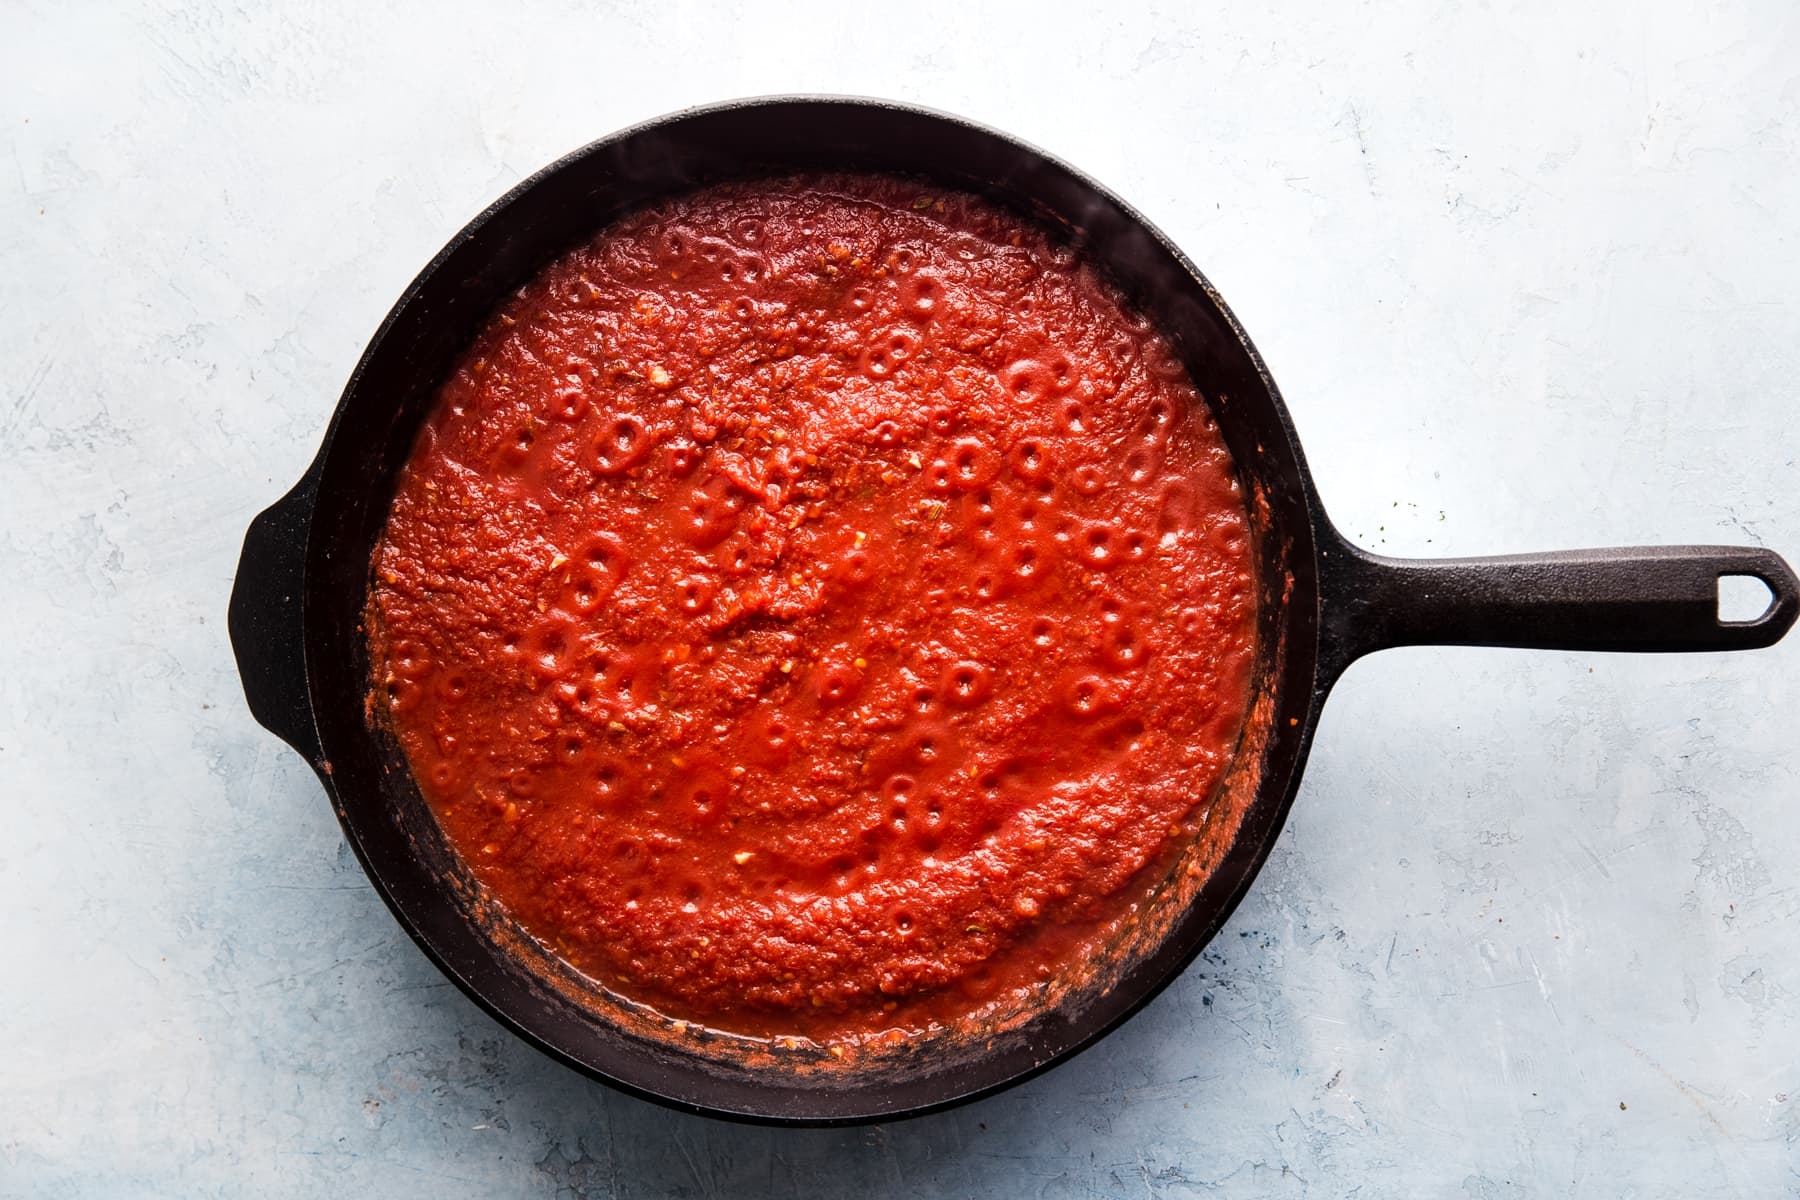 garlic, tomato paste and tomato sauce simmering in a cast iron skillet